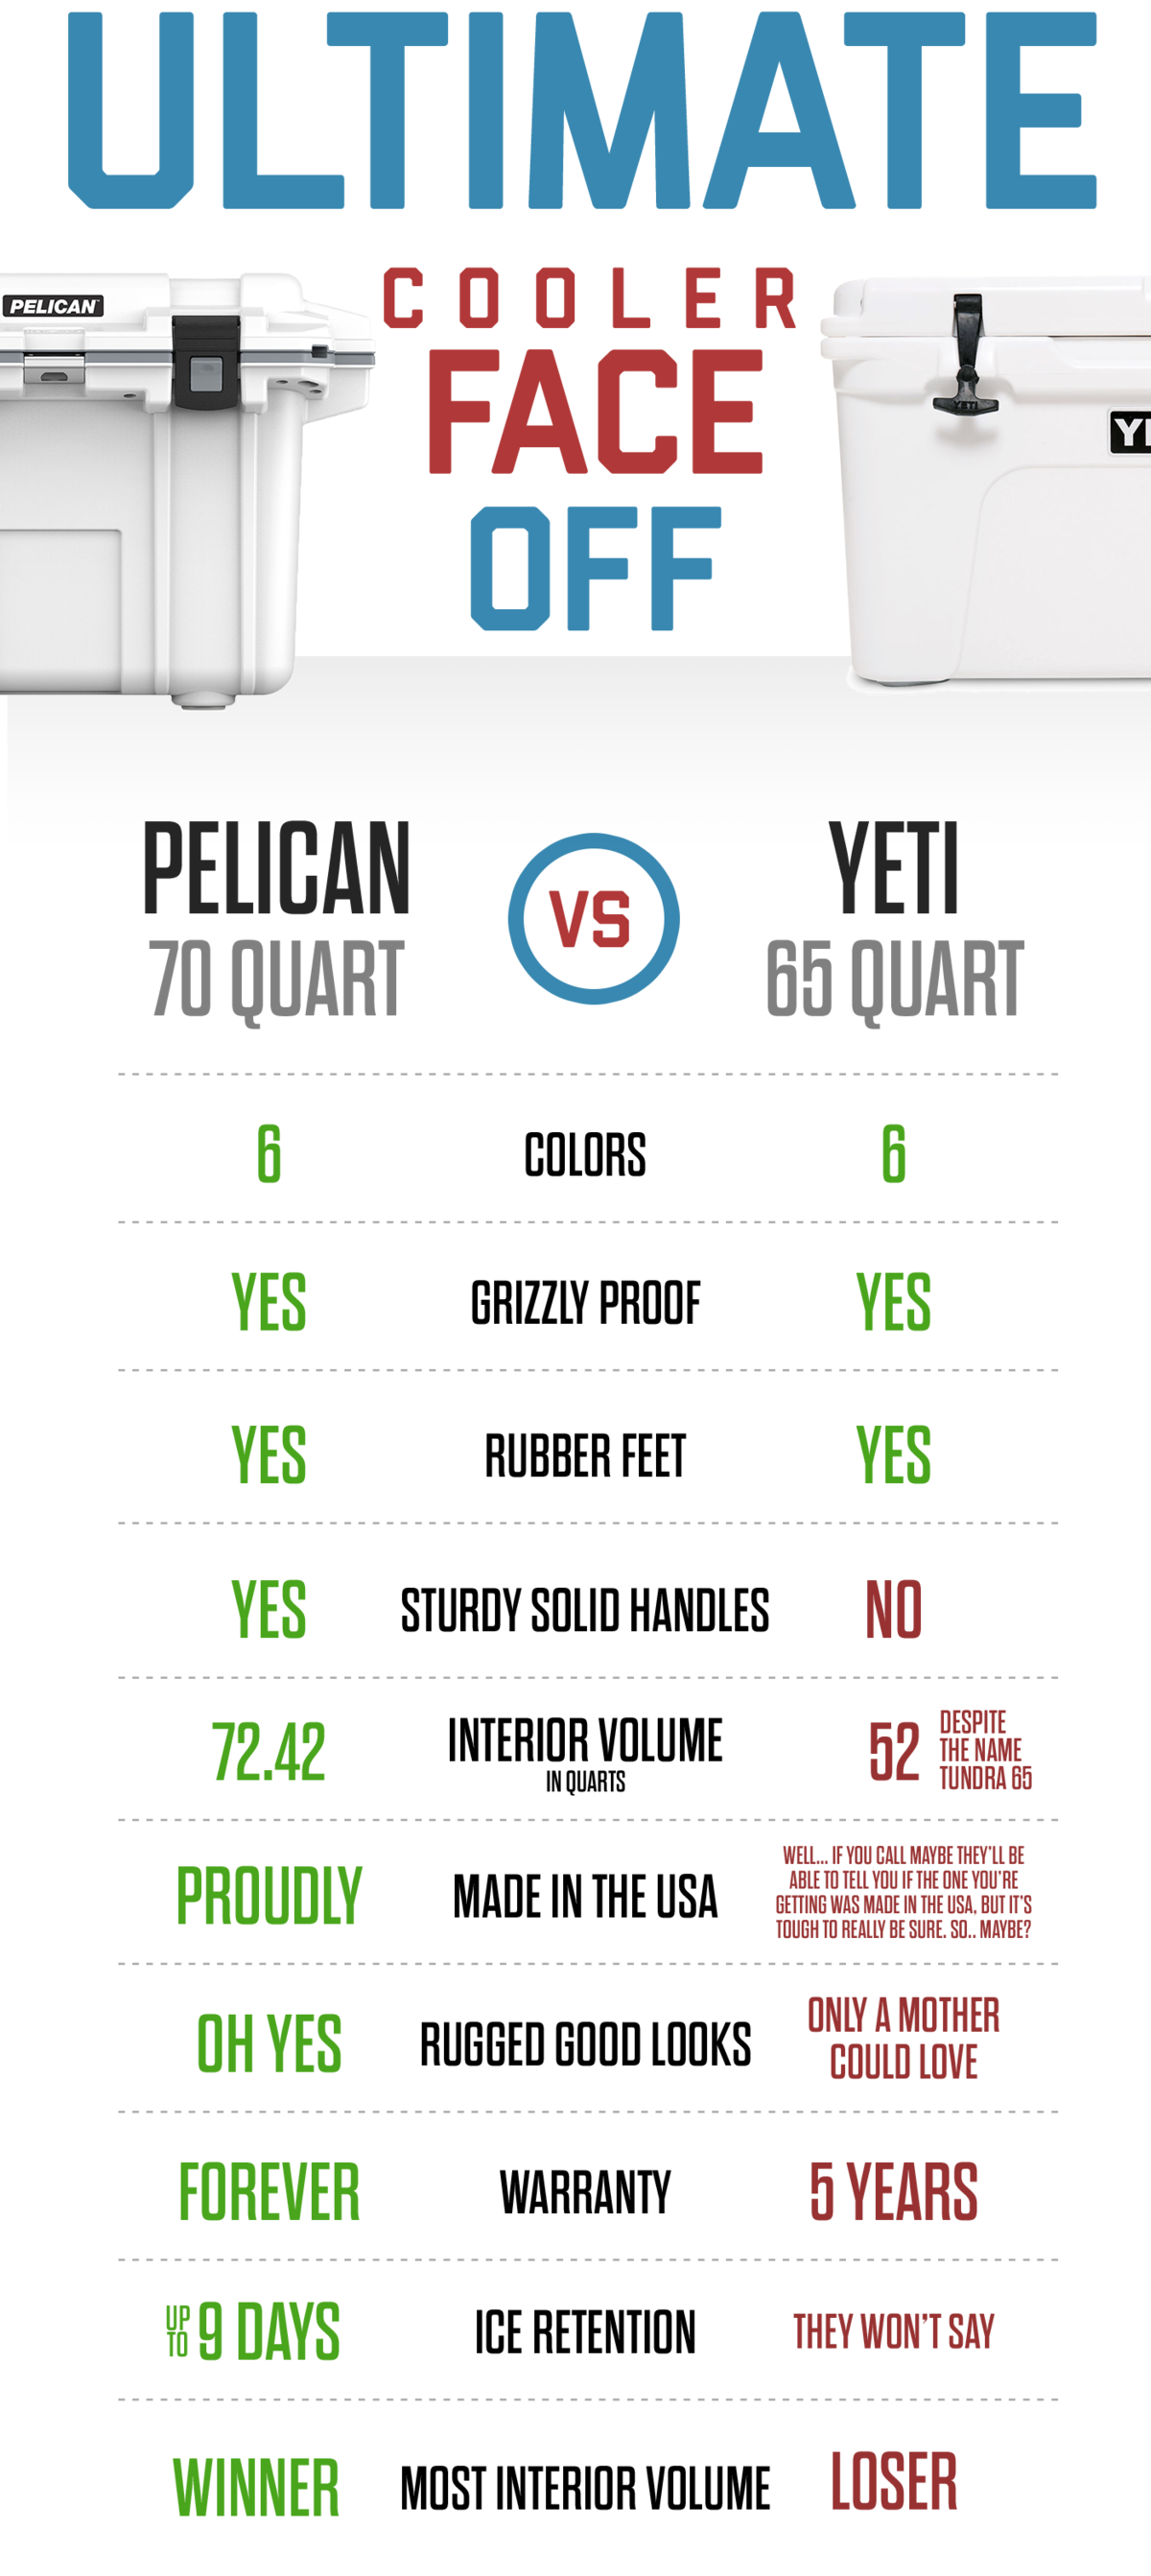 Pelican vs. Yeti. Which is better?